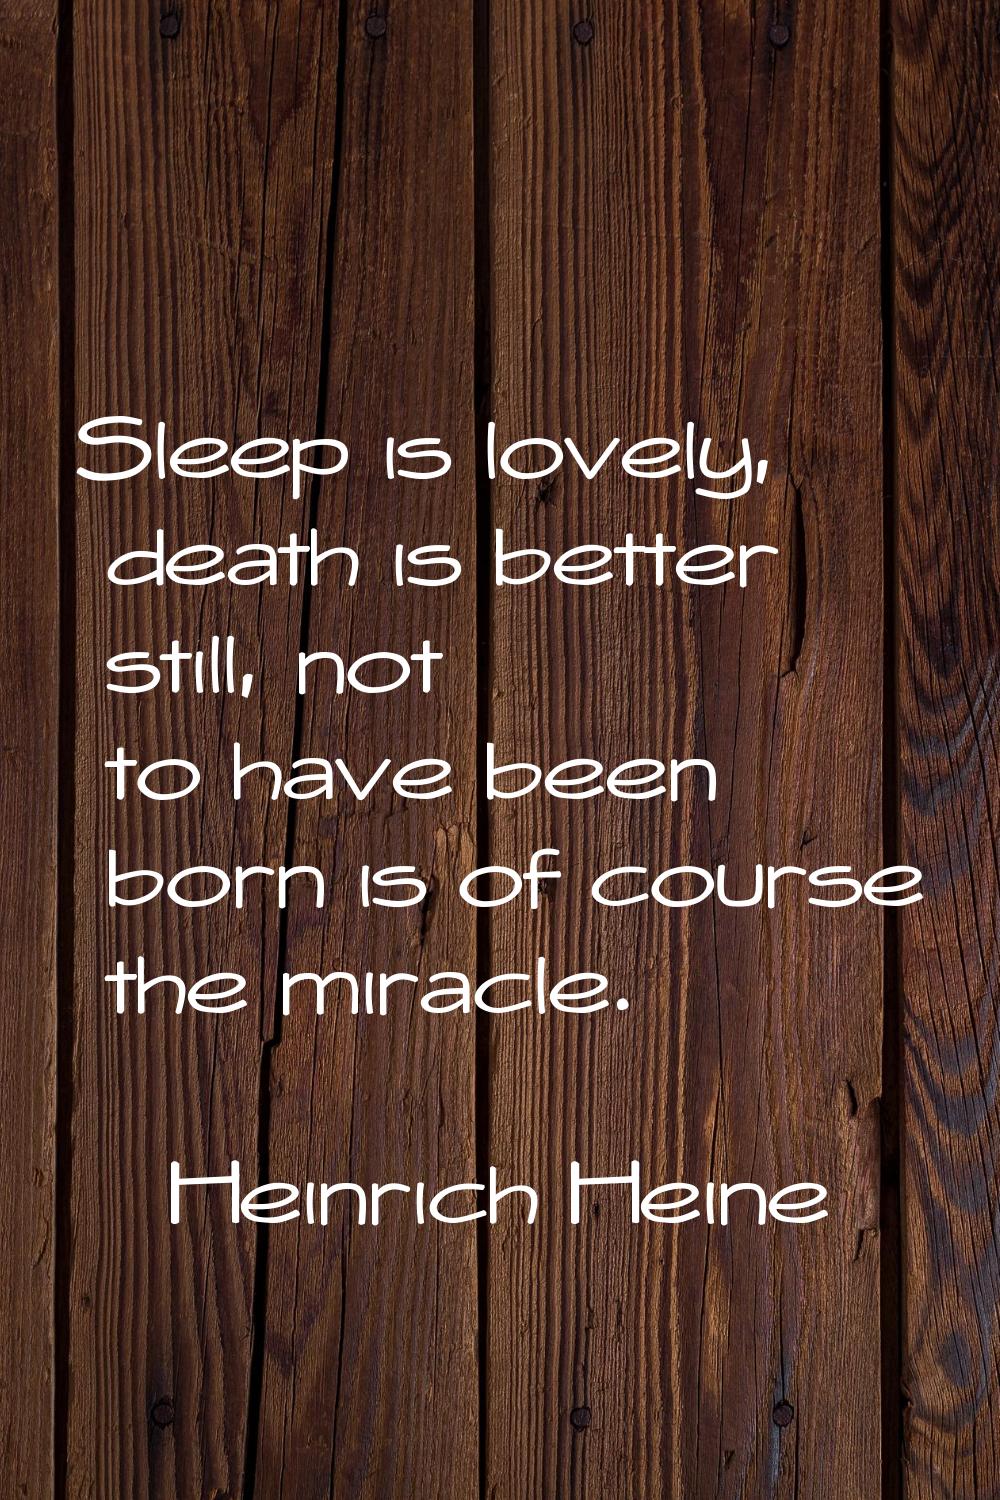 Sleep is lovely, death is better still, not to have been born is of course the miracle.